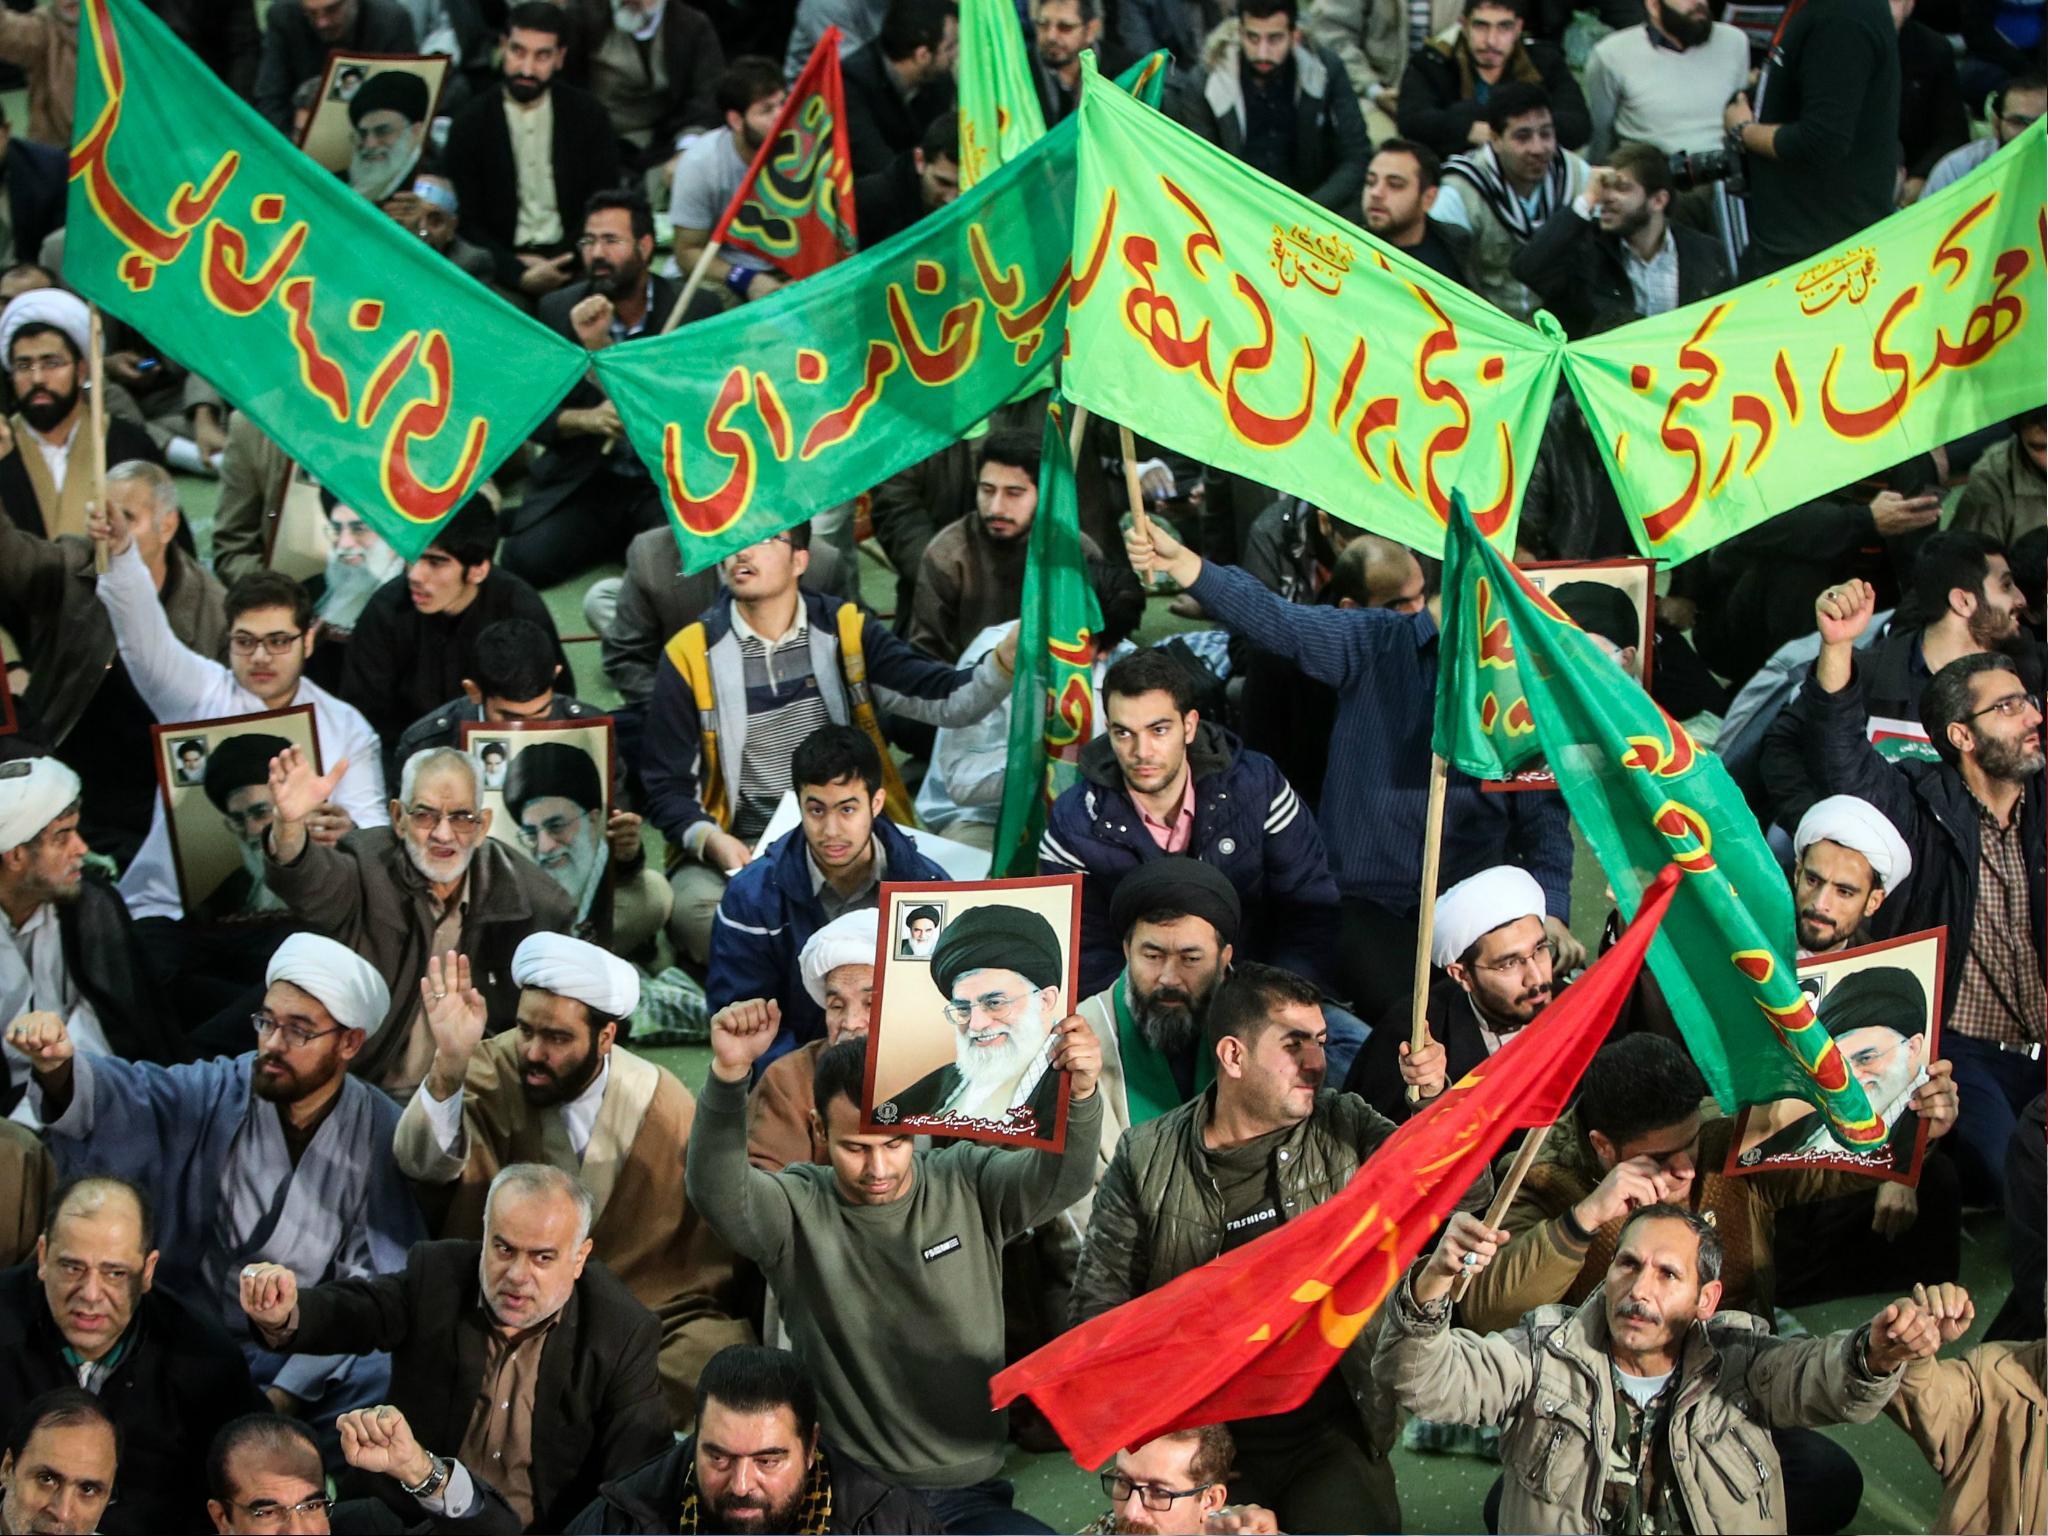 Iranians chant slogans as they march in support of the government near the Imam Khomeini grand mosque in the capital Tehran on 30 December 2017